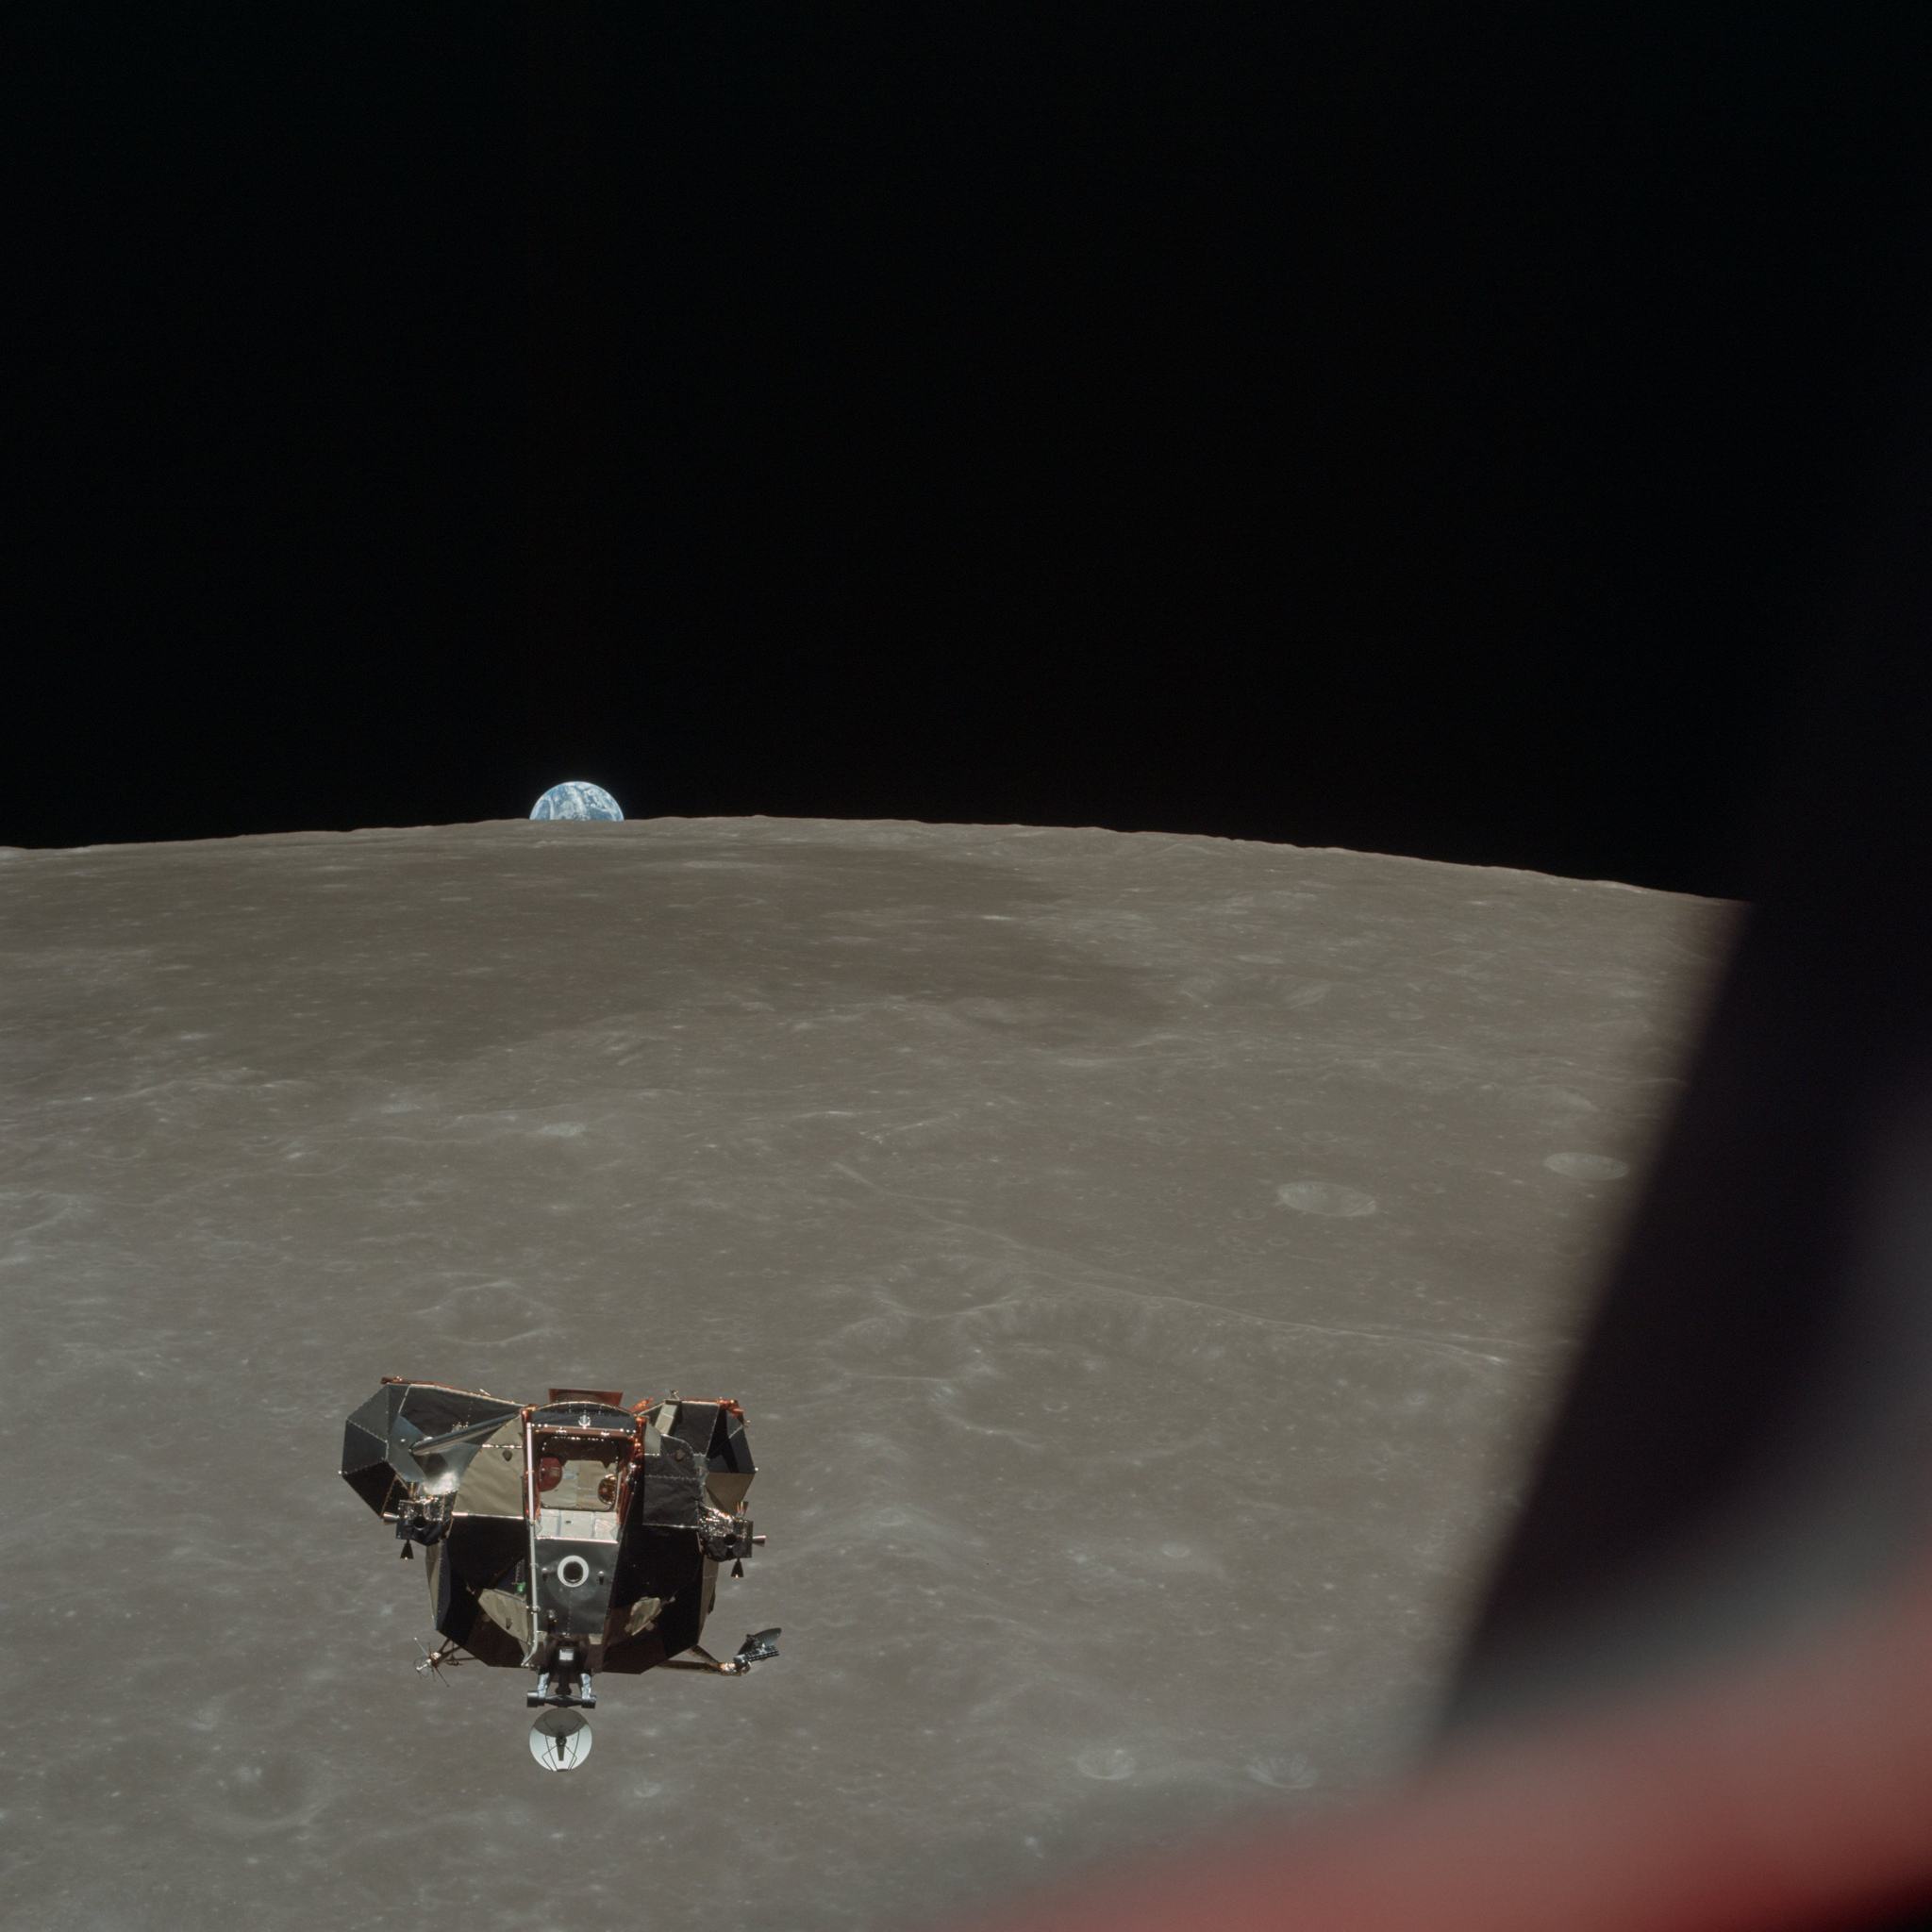 Apollo 11 Lunar Module ascent stage photographed from Command Module